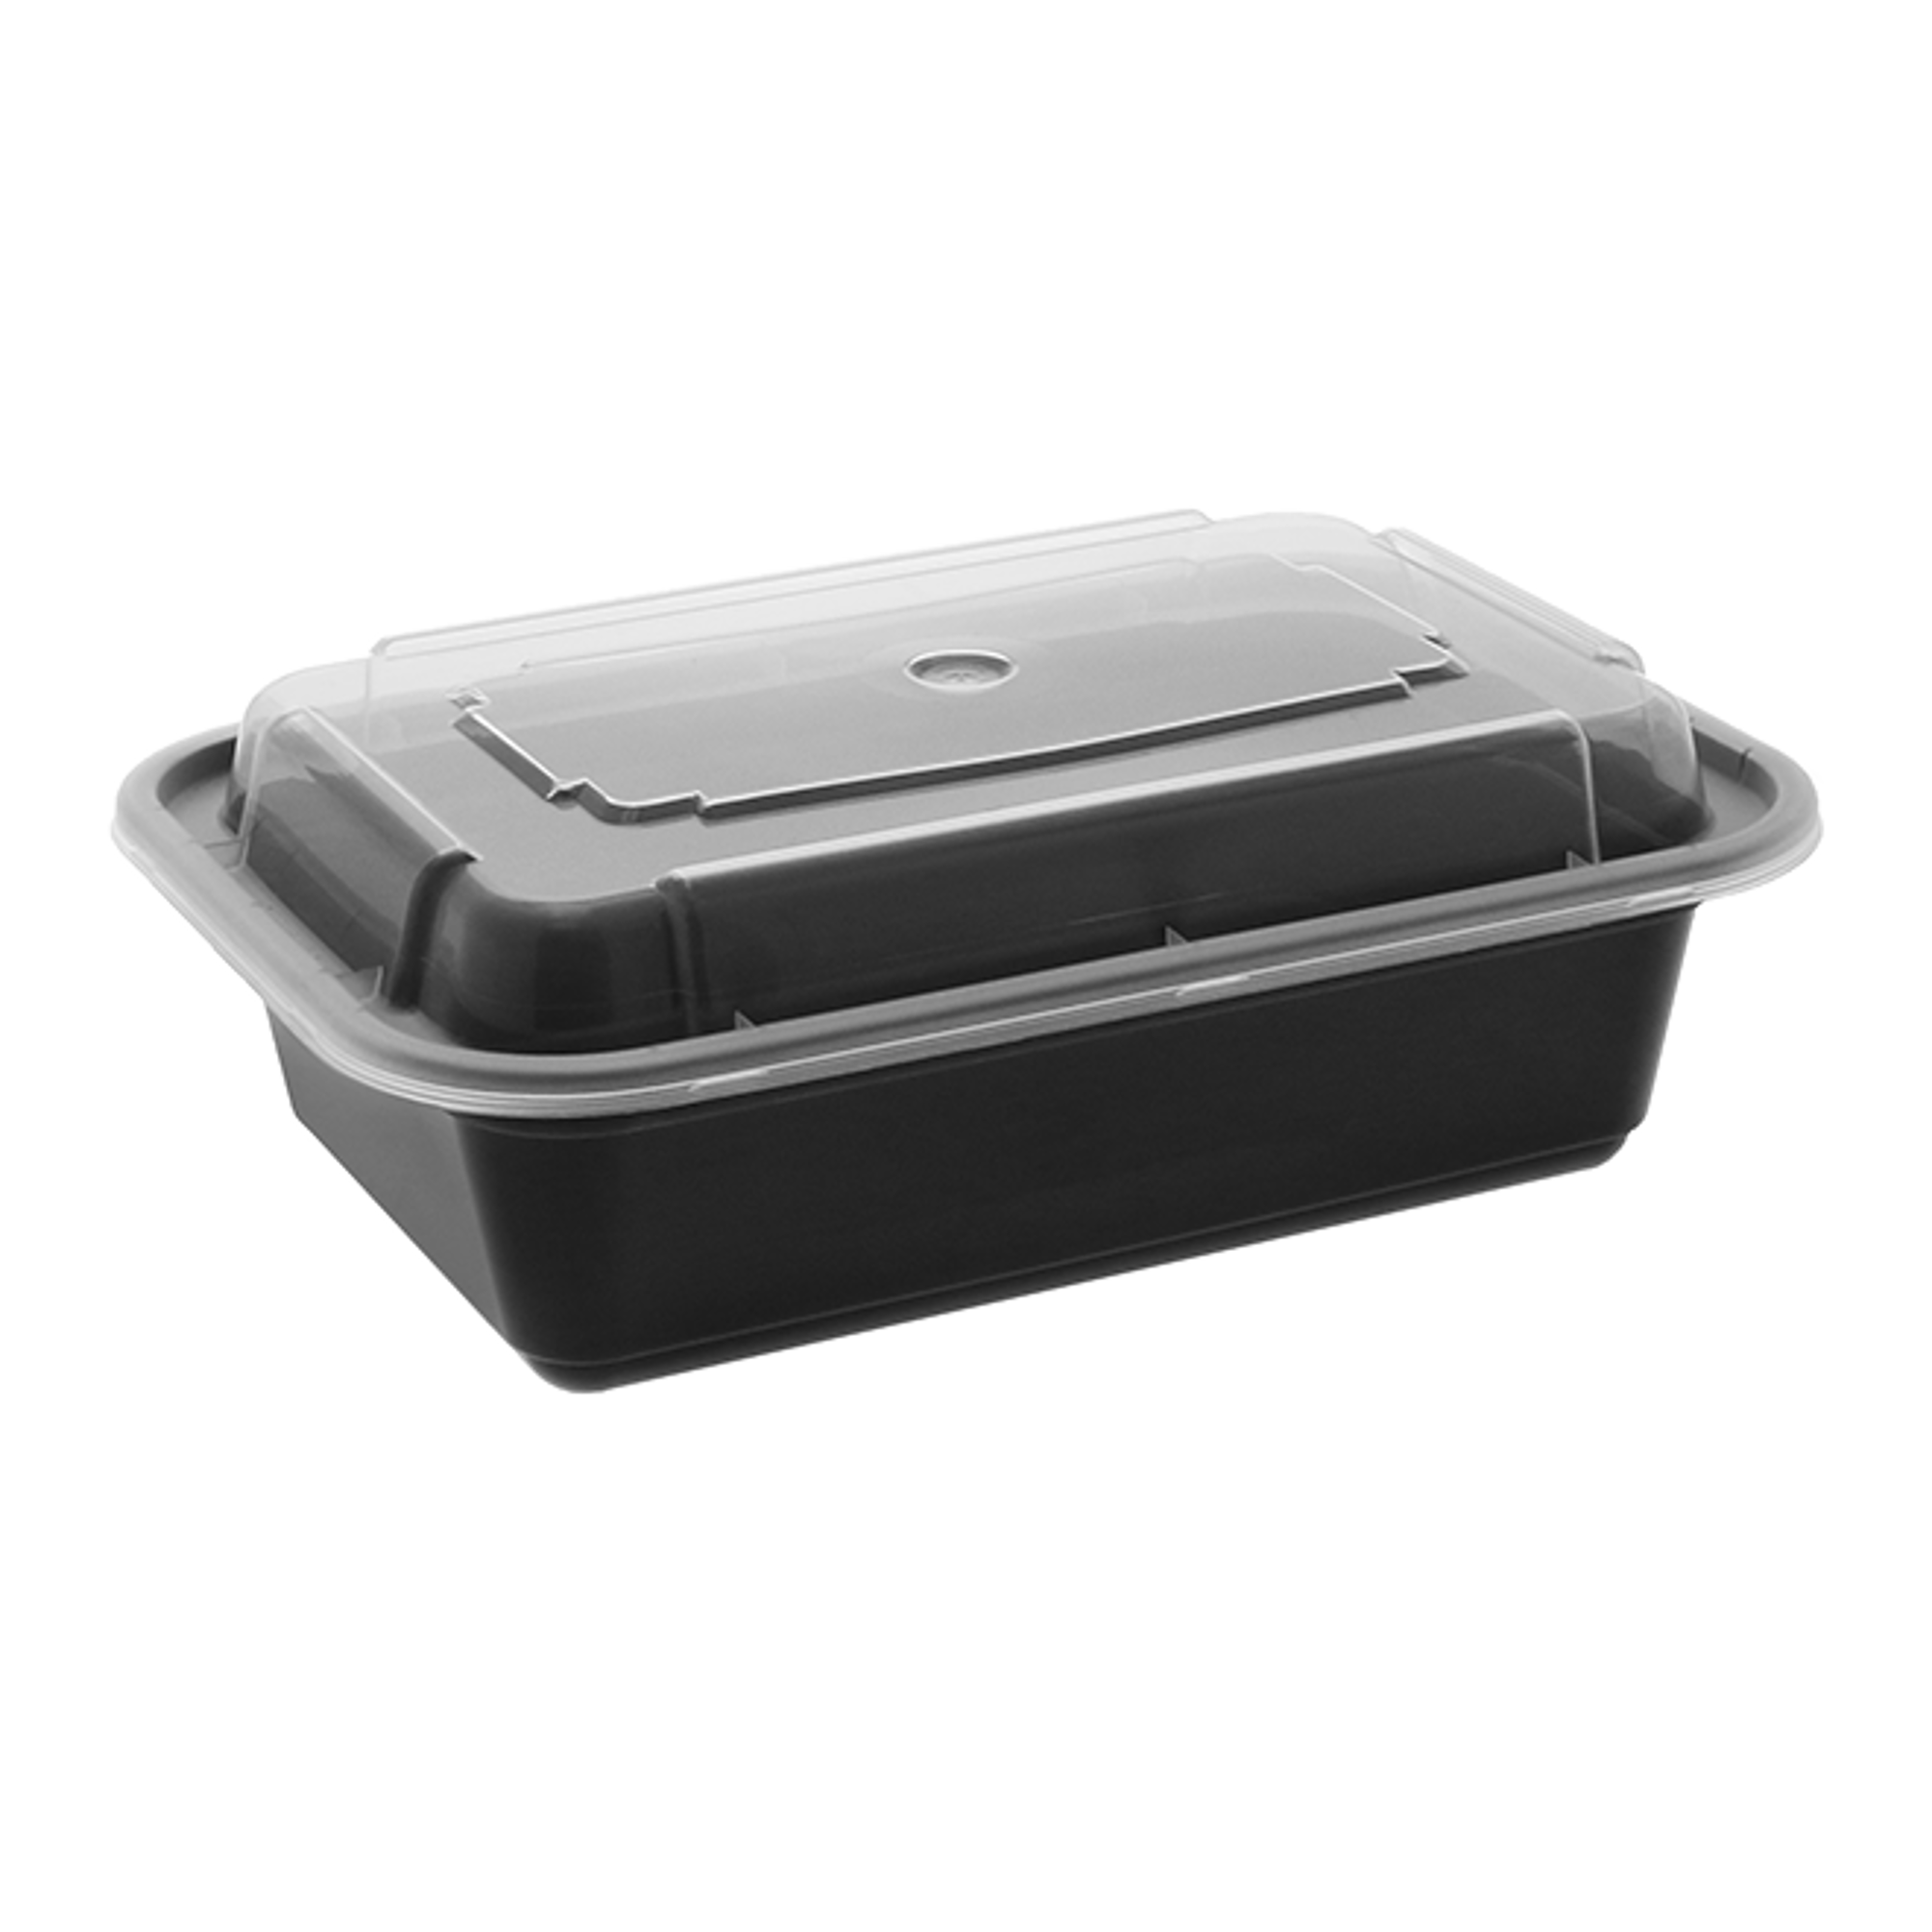 Rotho LONA 10 L container with transparent lid